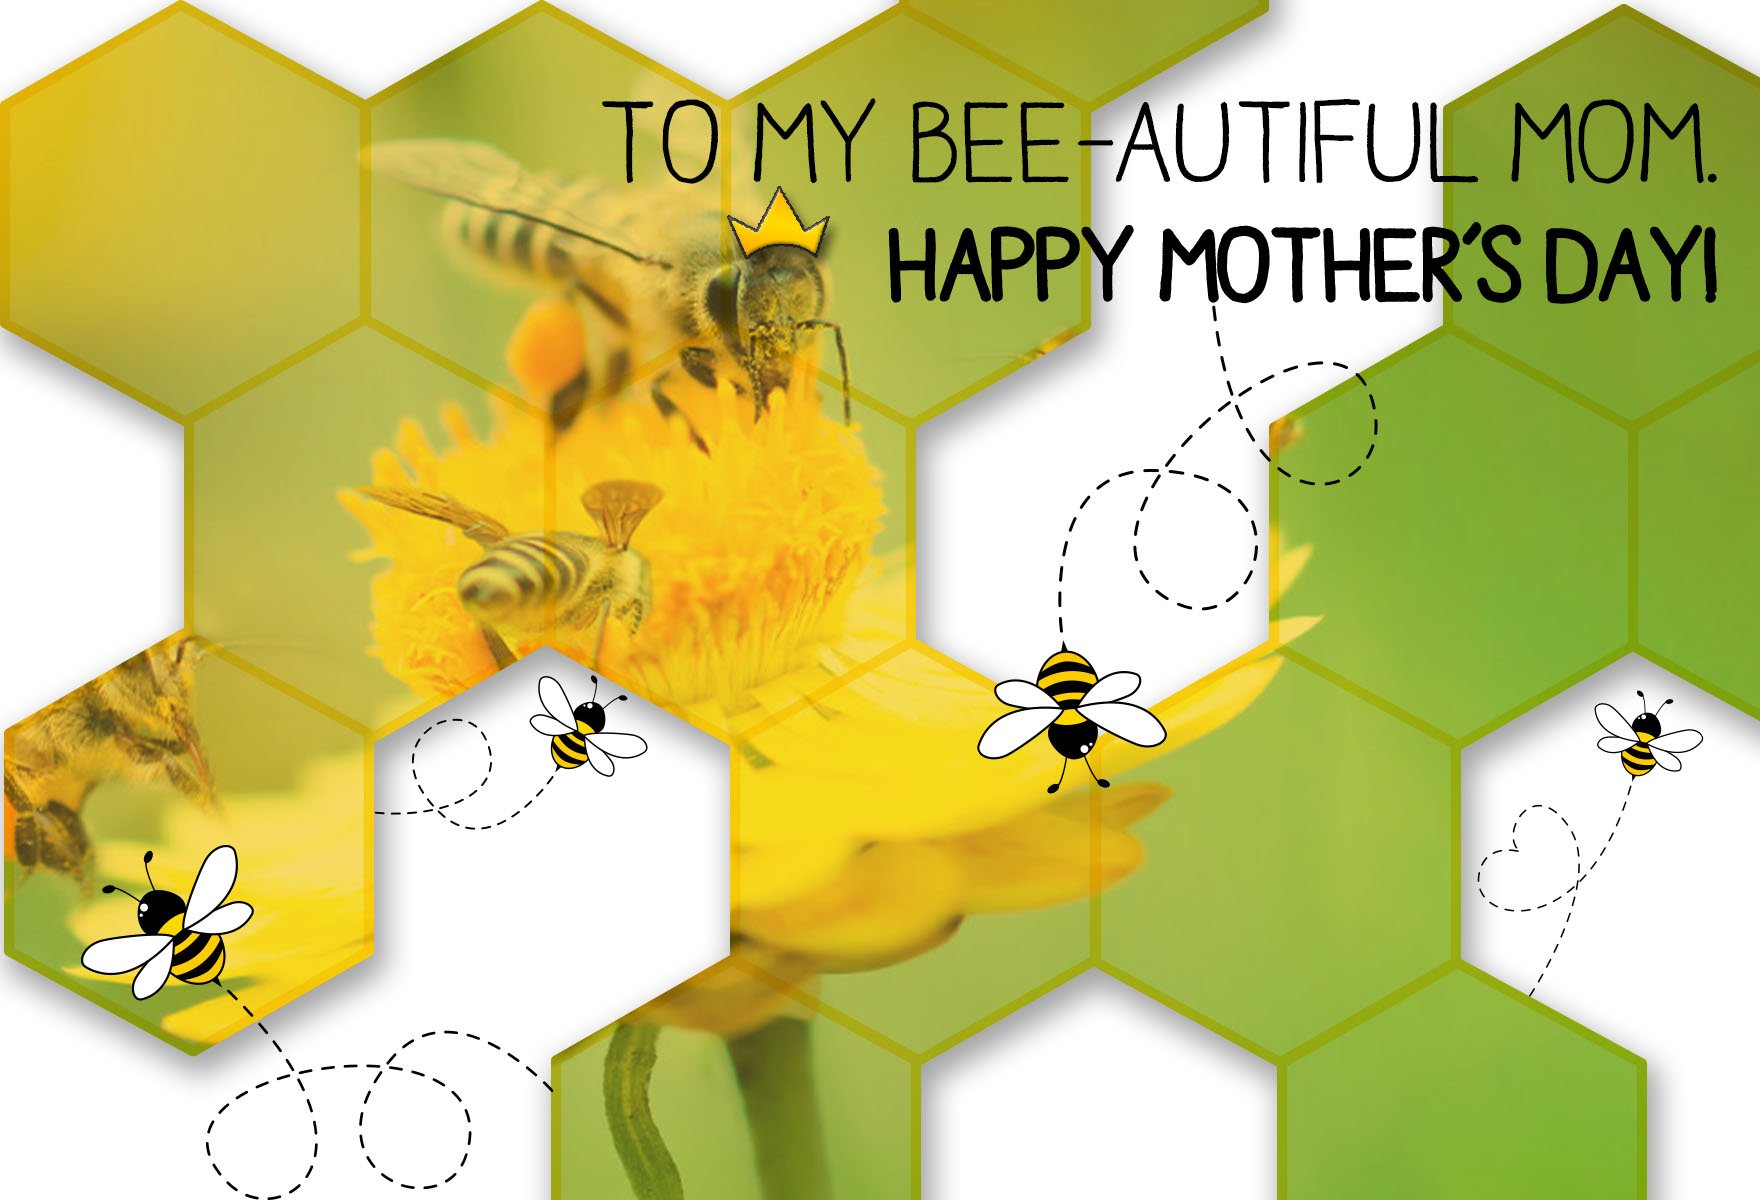 The Ultimate Mother: The Queen Bee